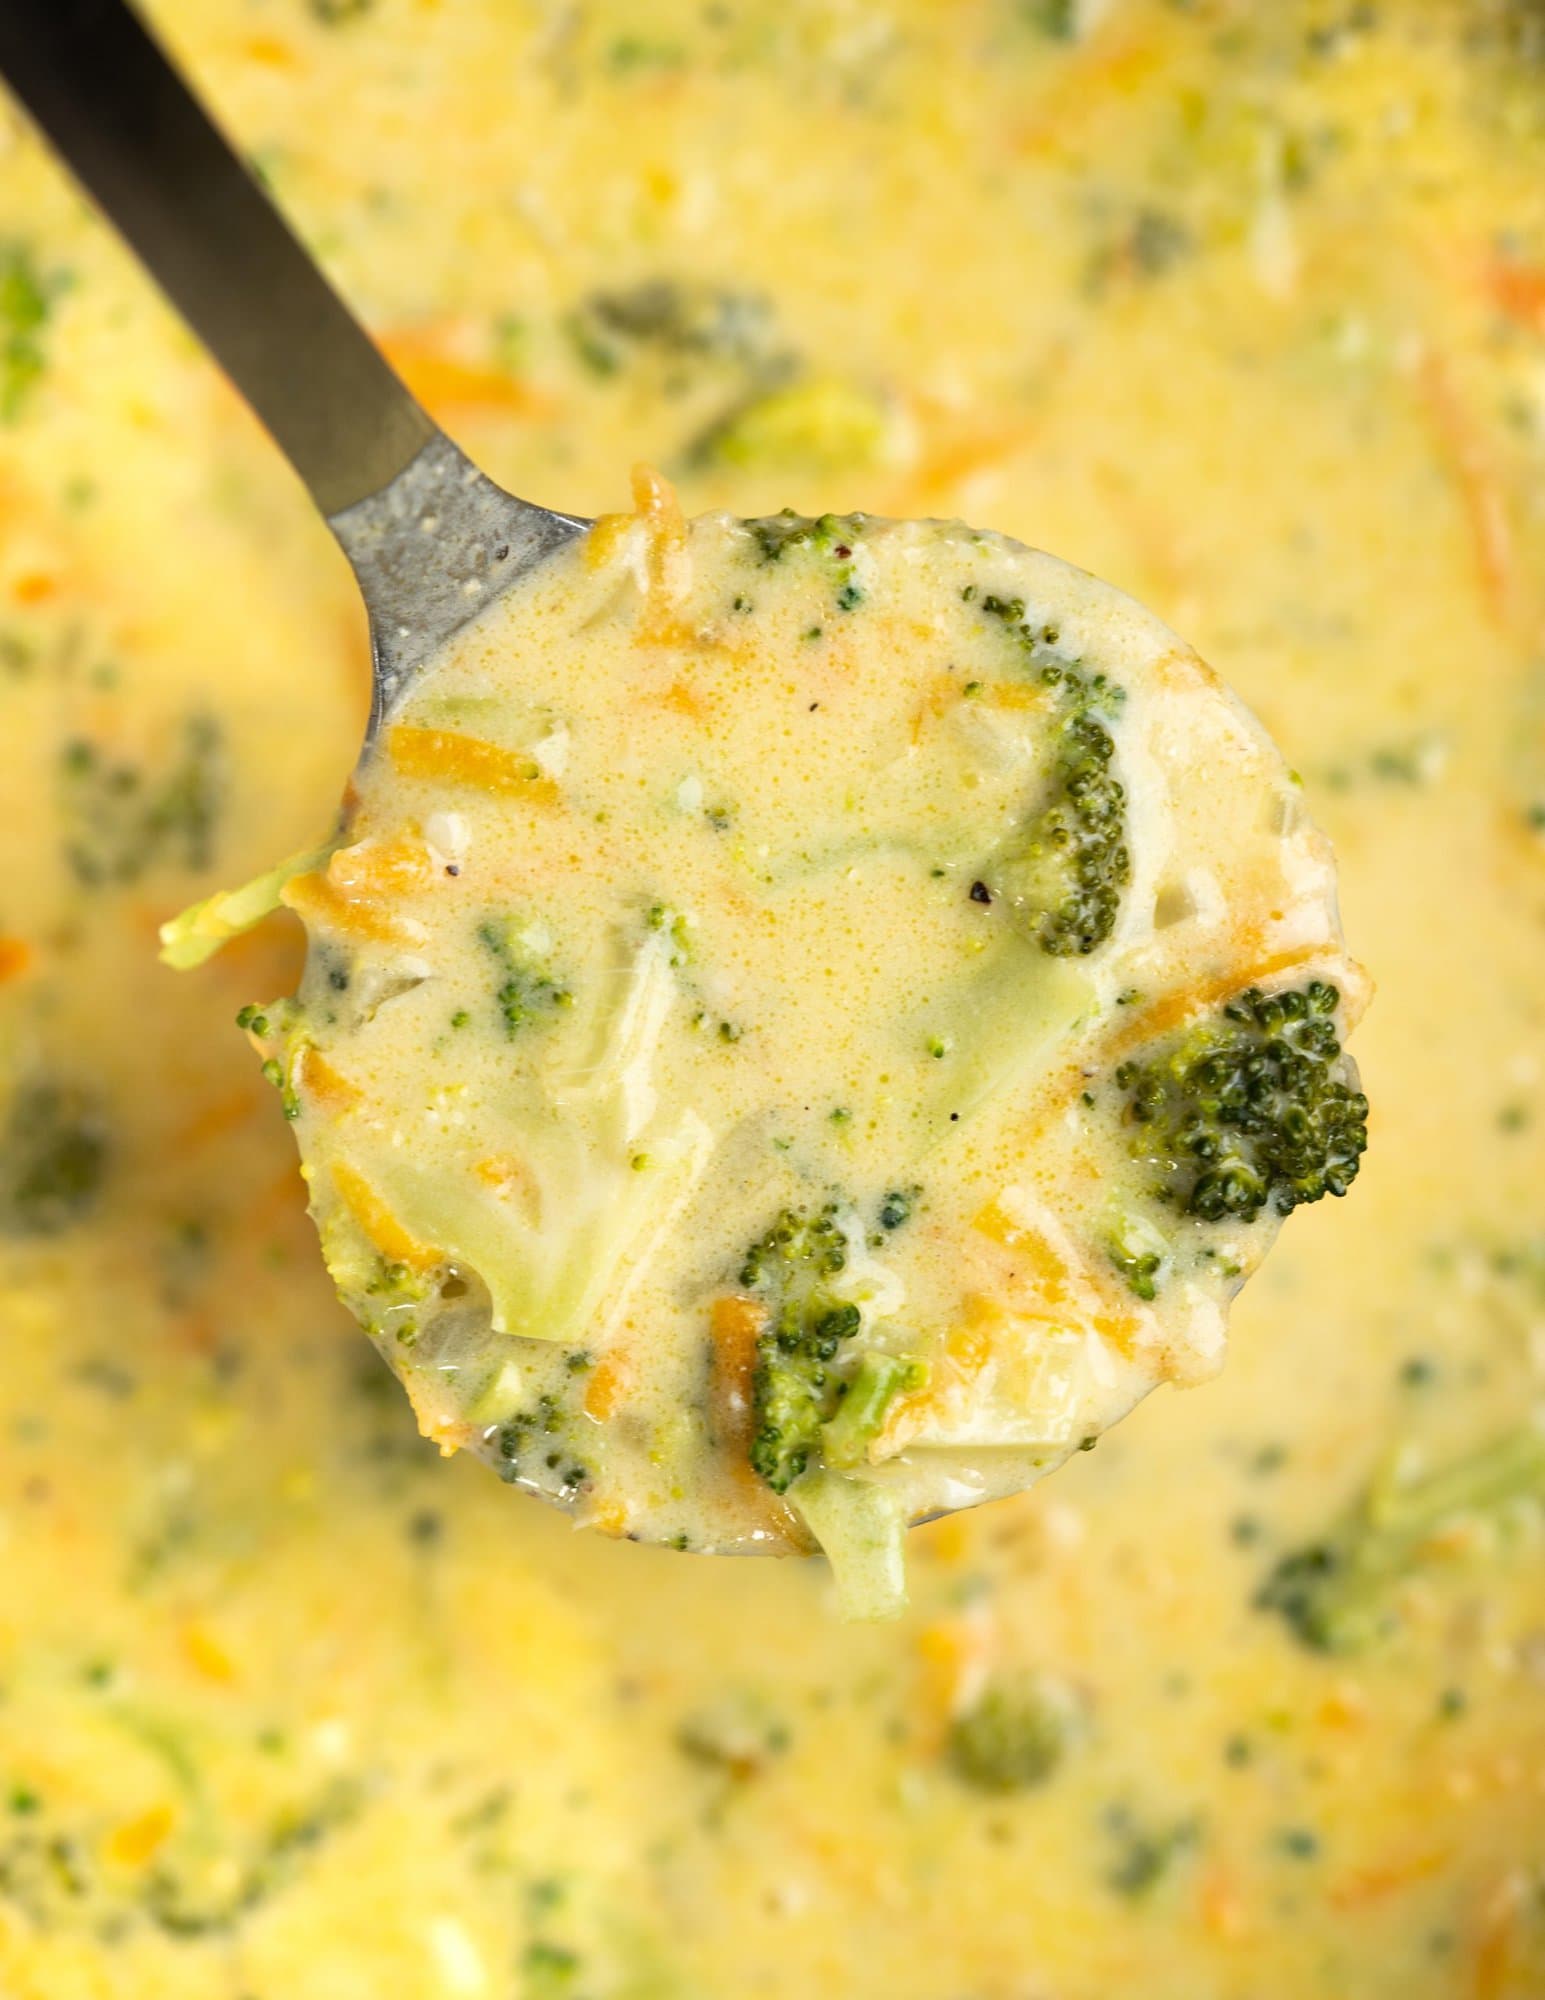 Lalde showing cooked tender broccoli, sliced carrots in a creamy and cheesy broccoli cheddar cheese soup.